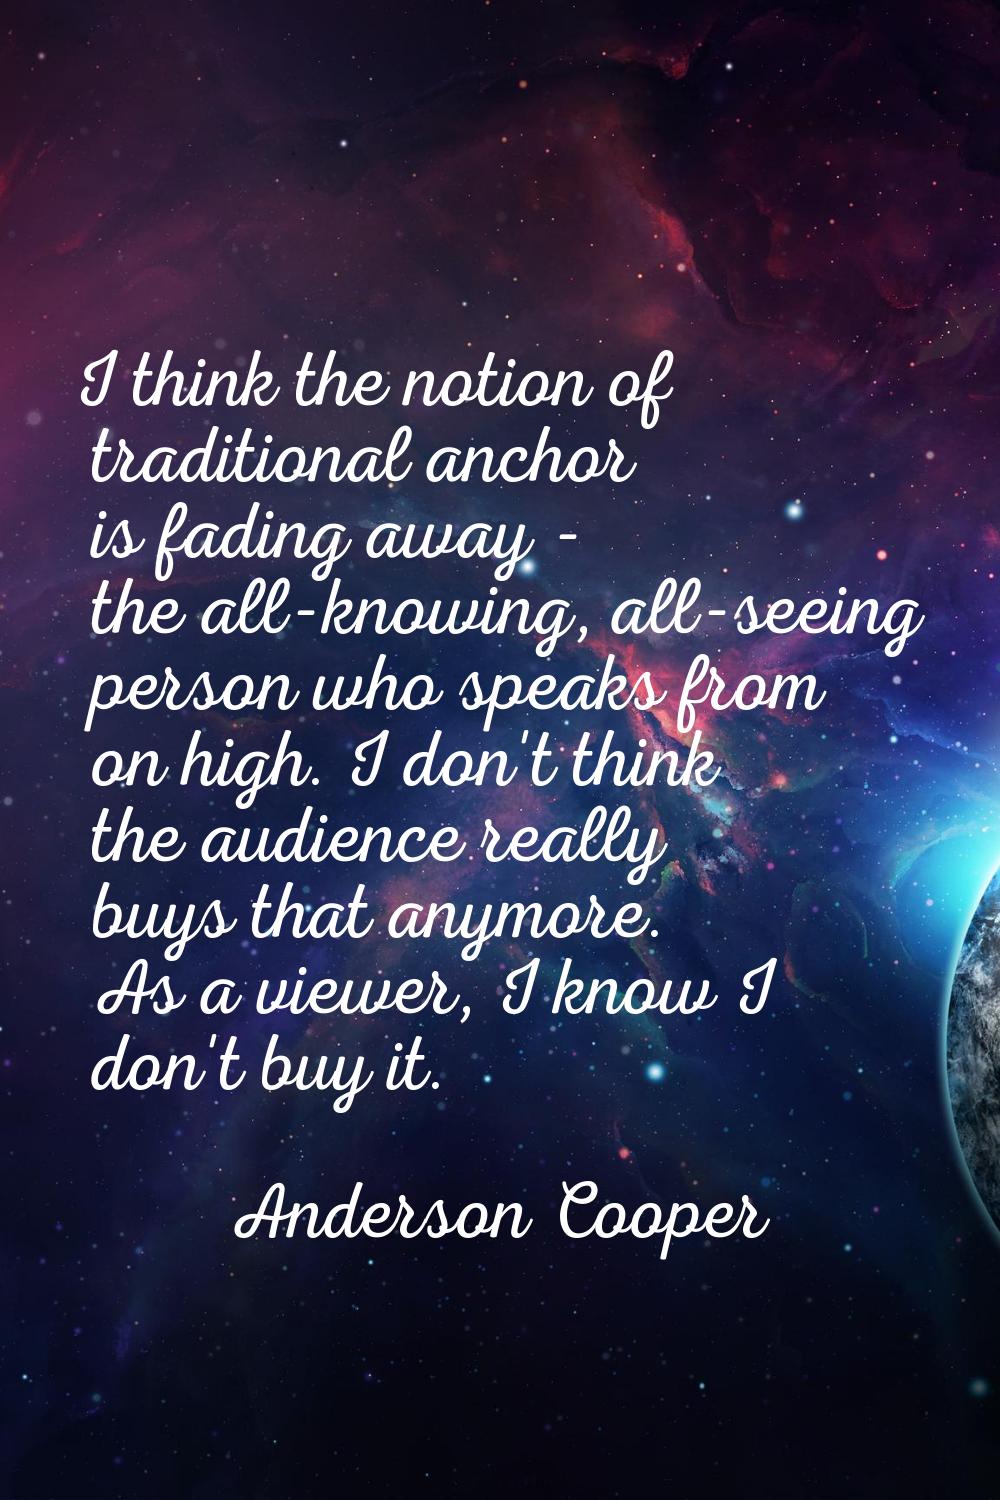 I think the notion of traditional anchor is fading away - the all-knowing, all-seeing person who sp